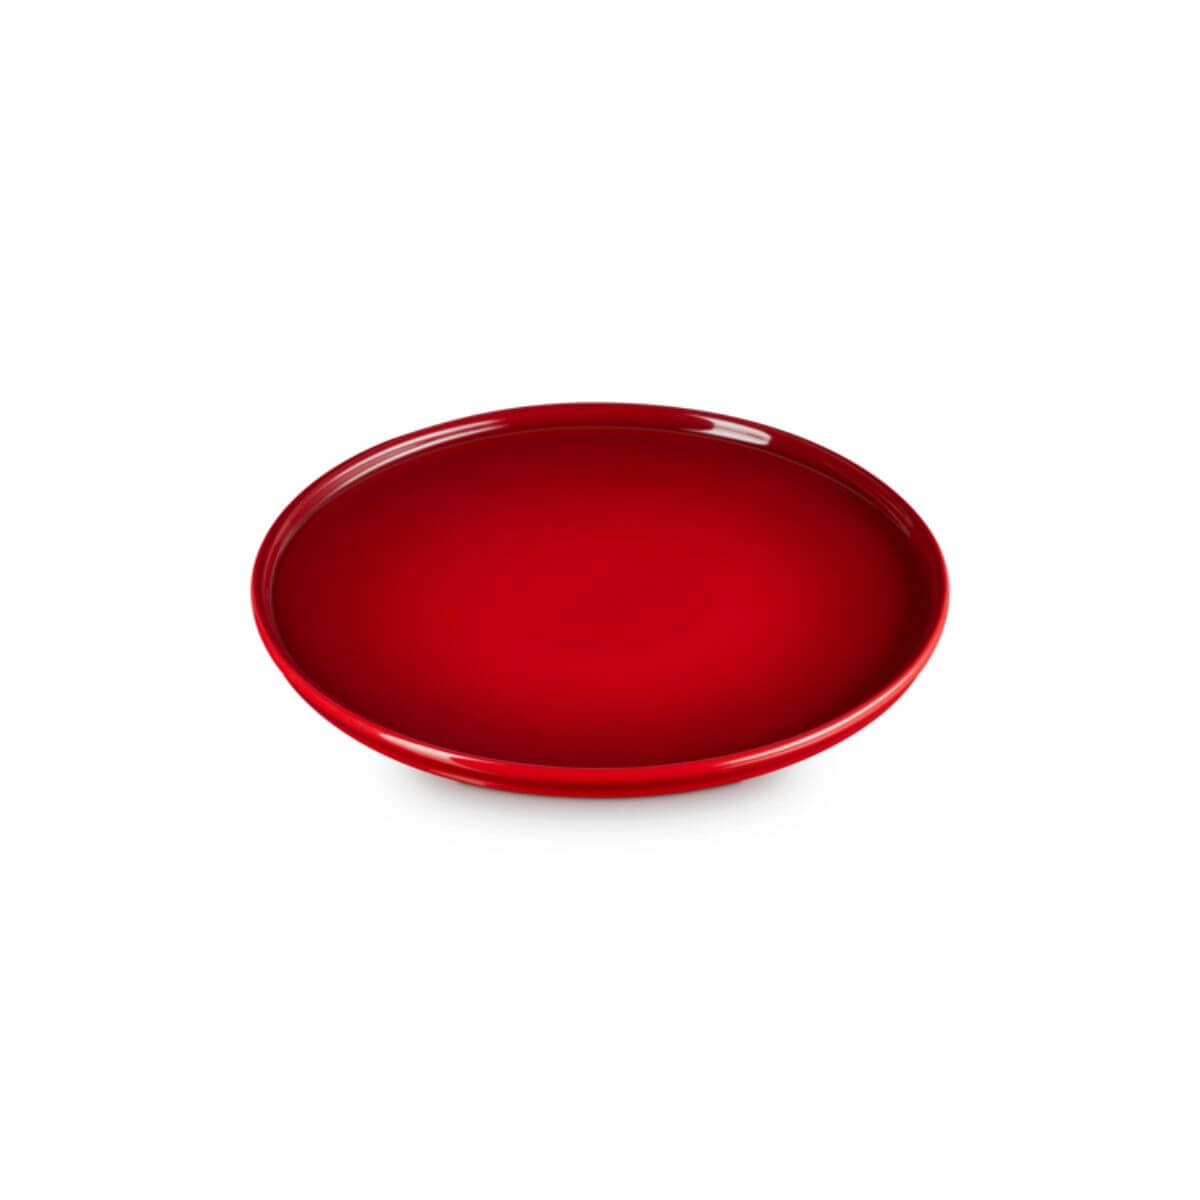 Le Creuset Footed Cake Stand Cerise